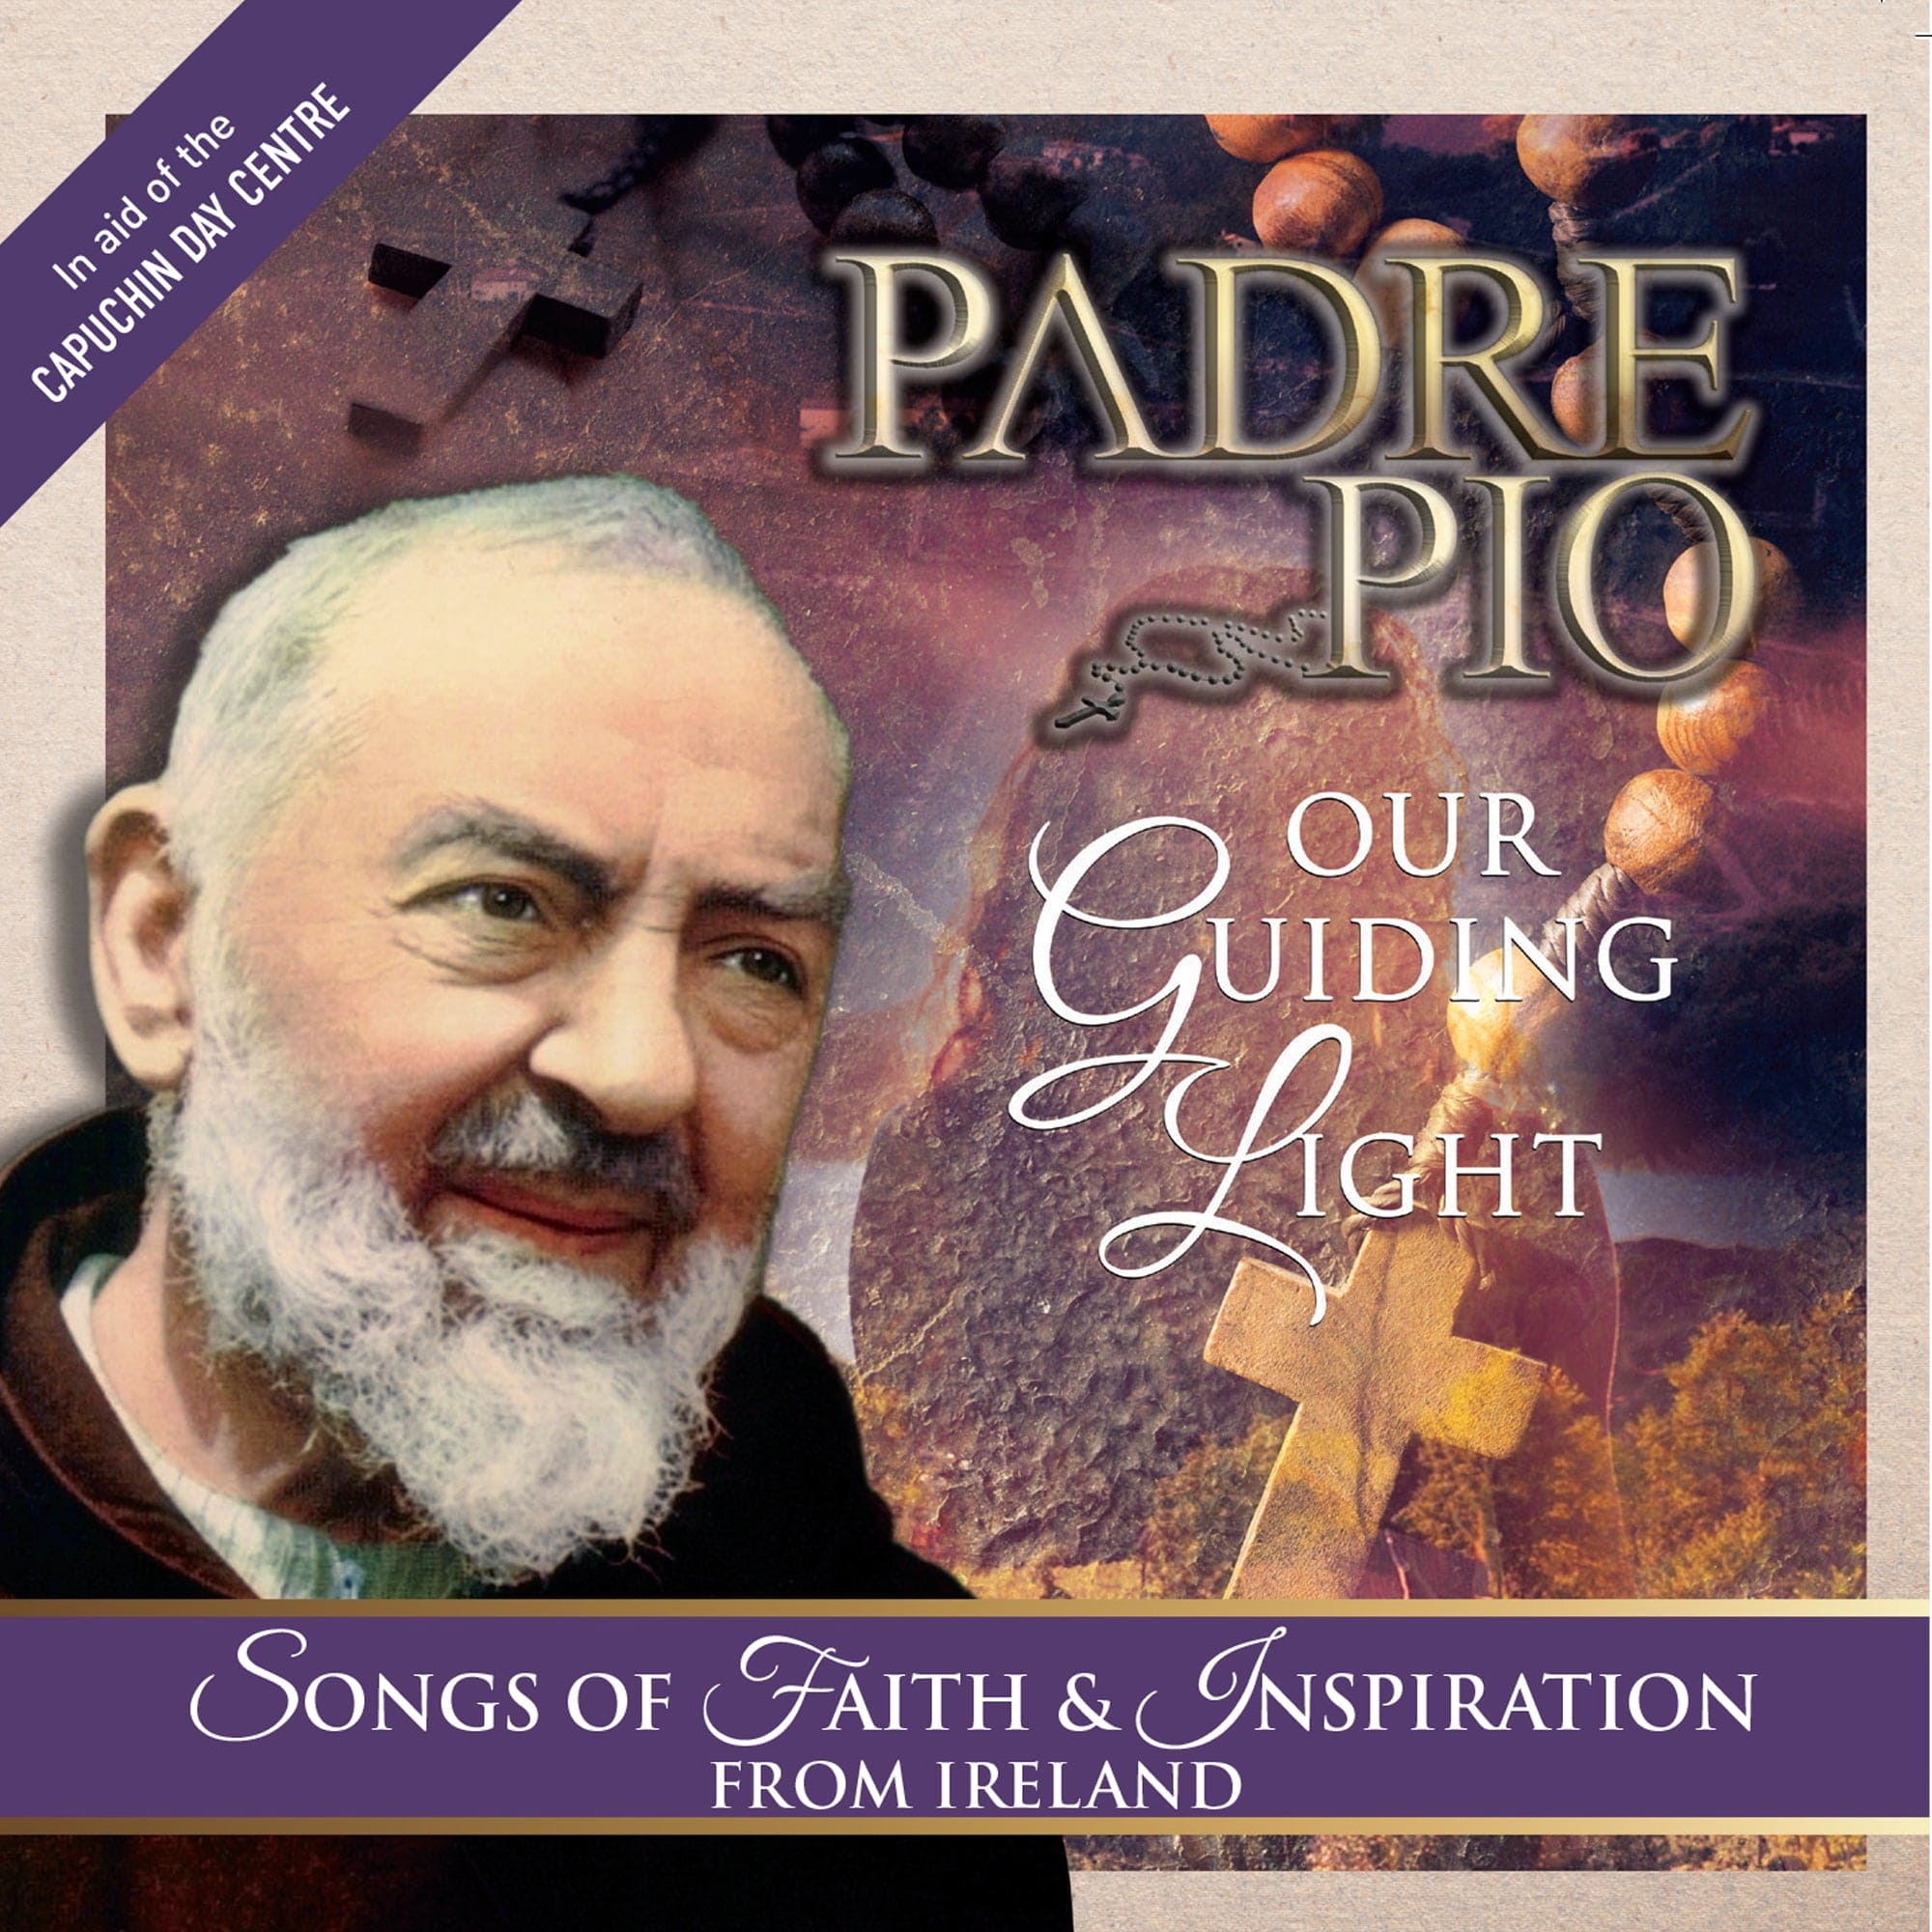 Padre Pio - Our Guiding Light (Songs of Faith & Inspiration from Ireland) - Various Artists [CD]